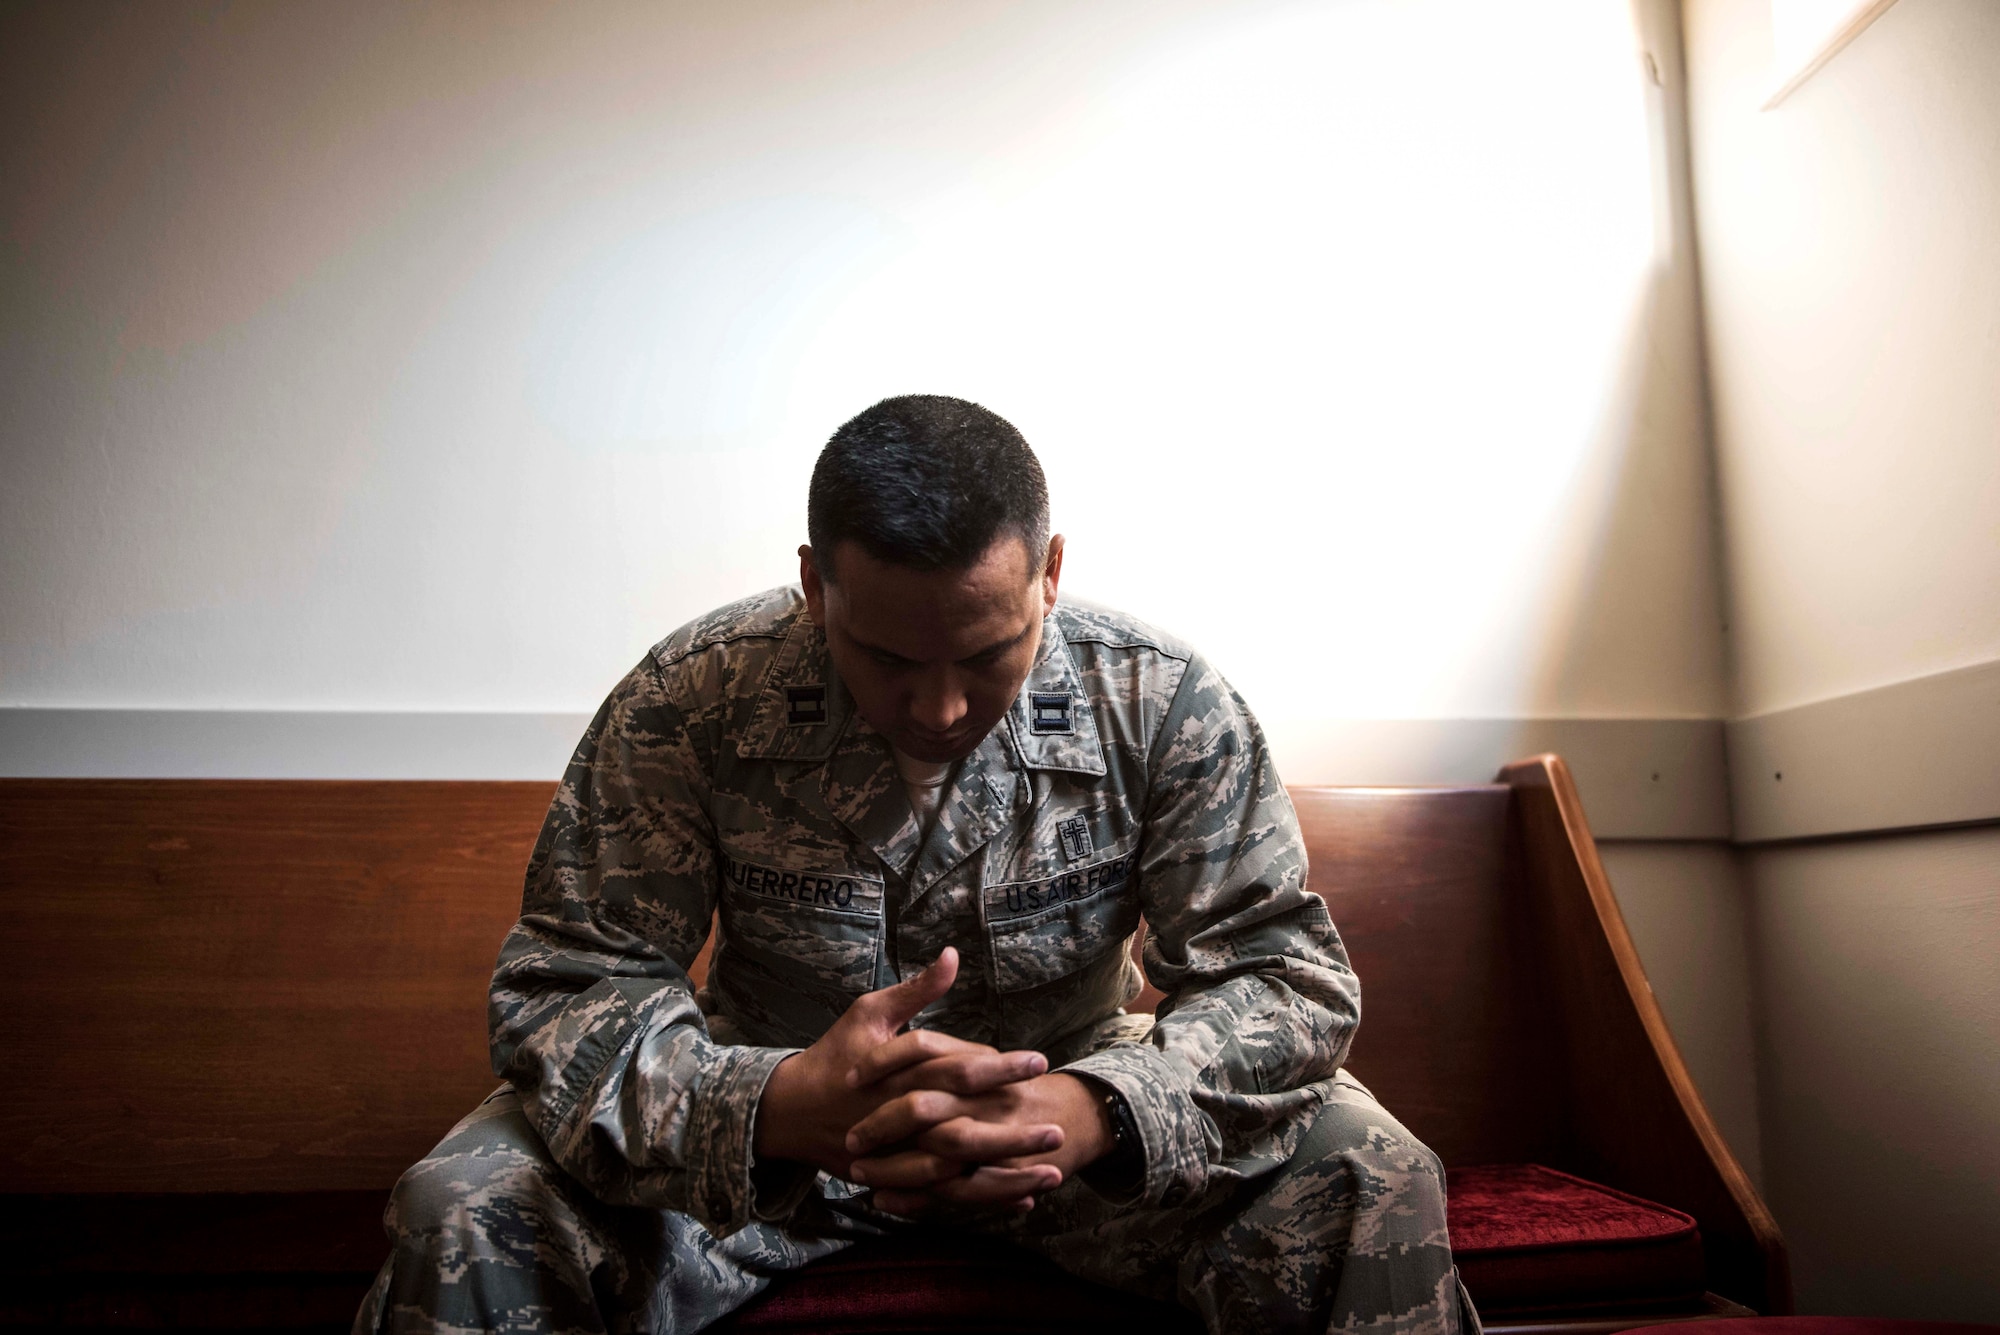 U.S. Air Force Capt. Genesis Guerrero, a 39th Air Base Wing chaplain, prays in the chapel at Incirlik Air Base, Turkey, Oct. 2, 2019. At a young age, Guerrero and his entire family fled from their home in Guam because his father’s troubled lifestyle placed them all in danger. (U.S. Air Force photo by Staff. Sgt. Joshua Magbanua)